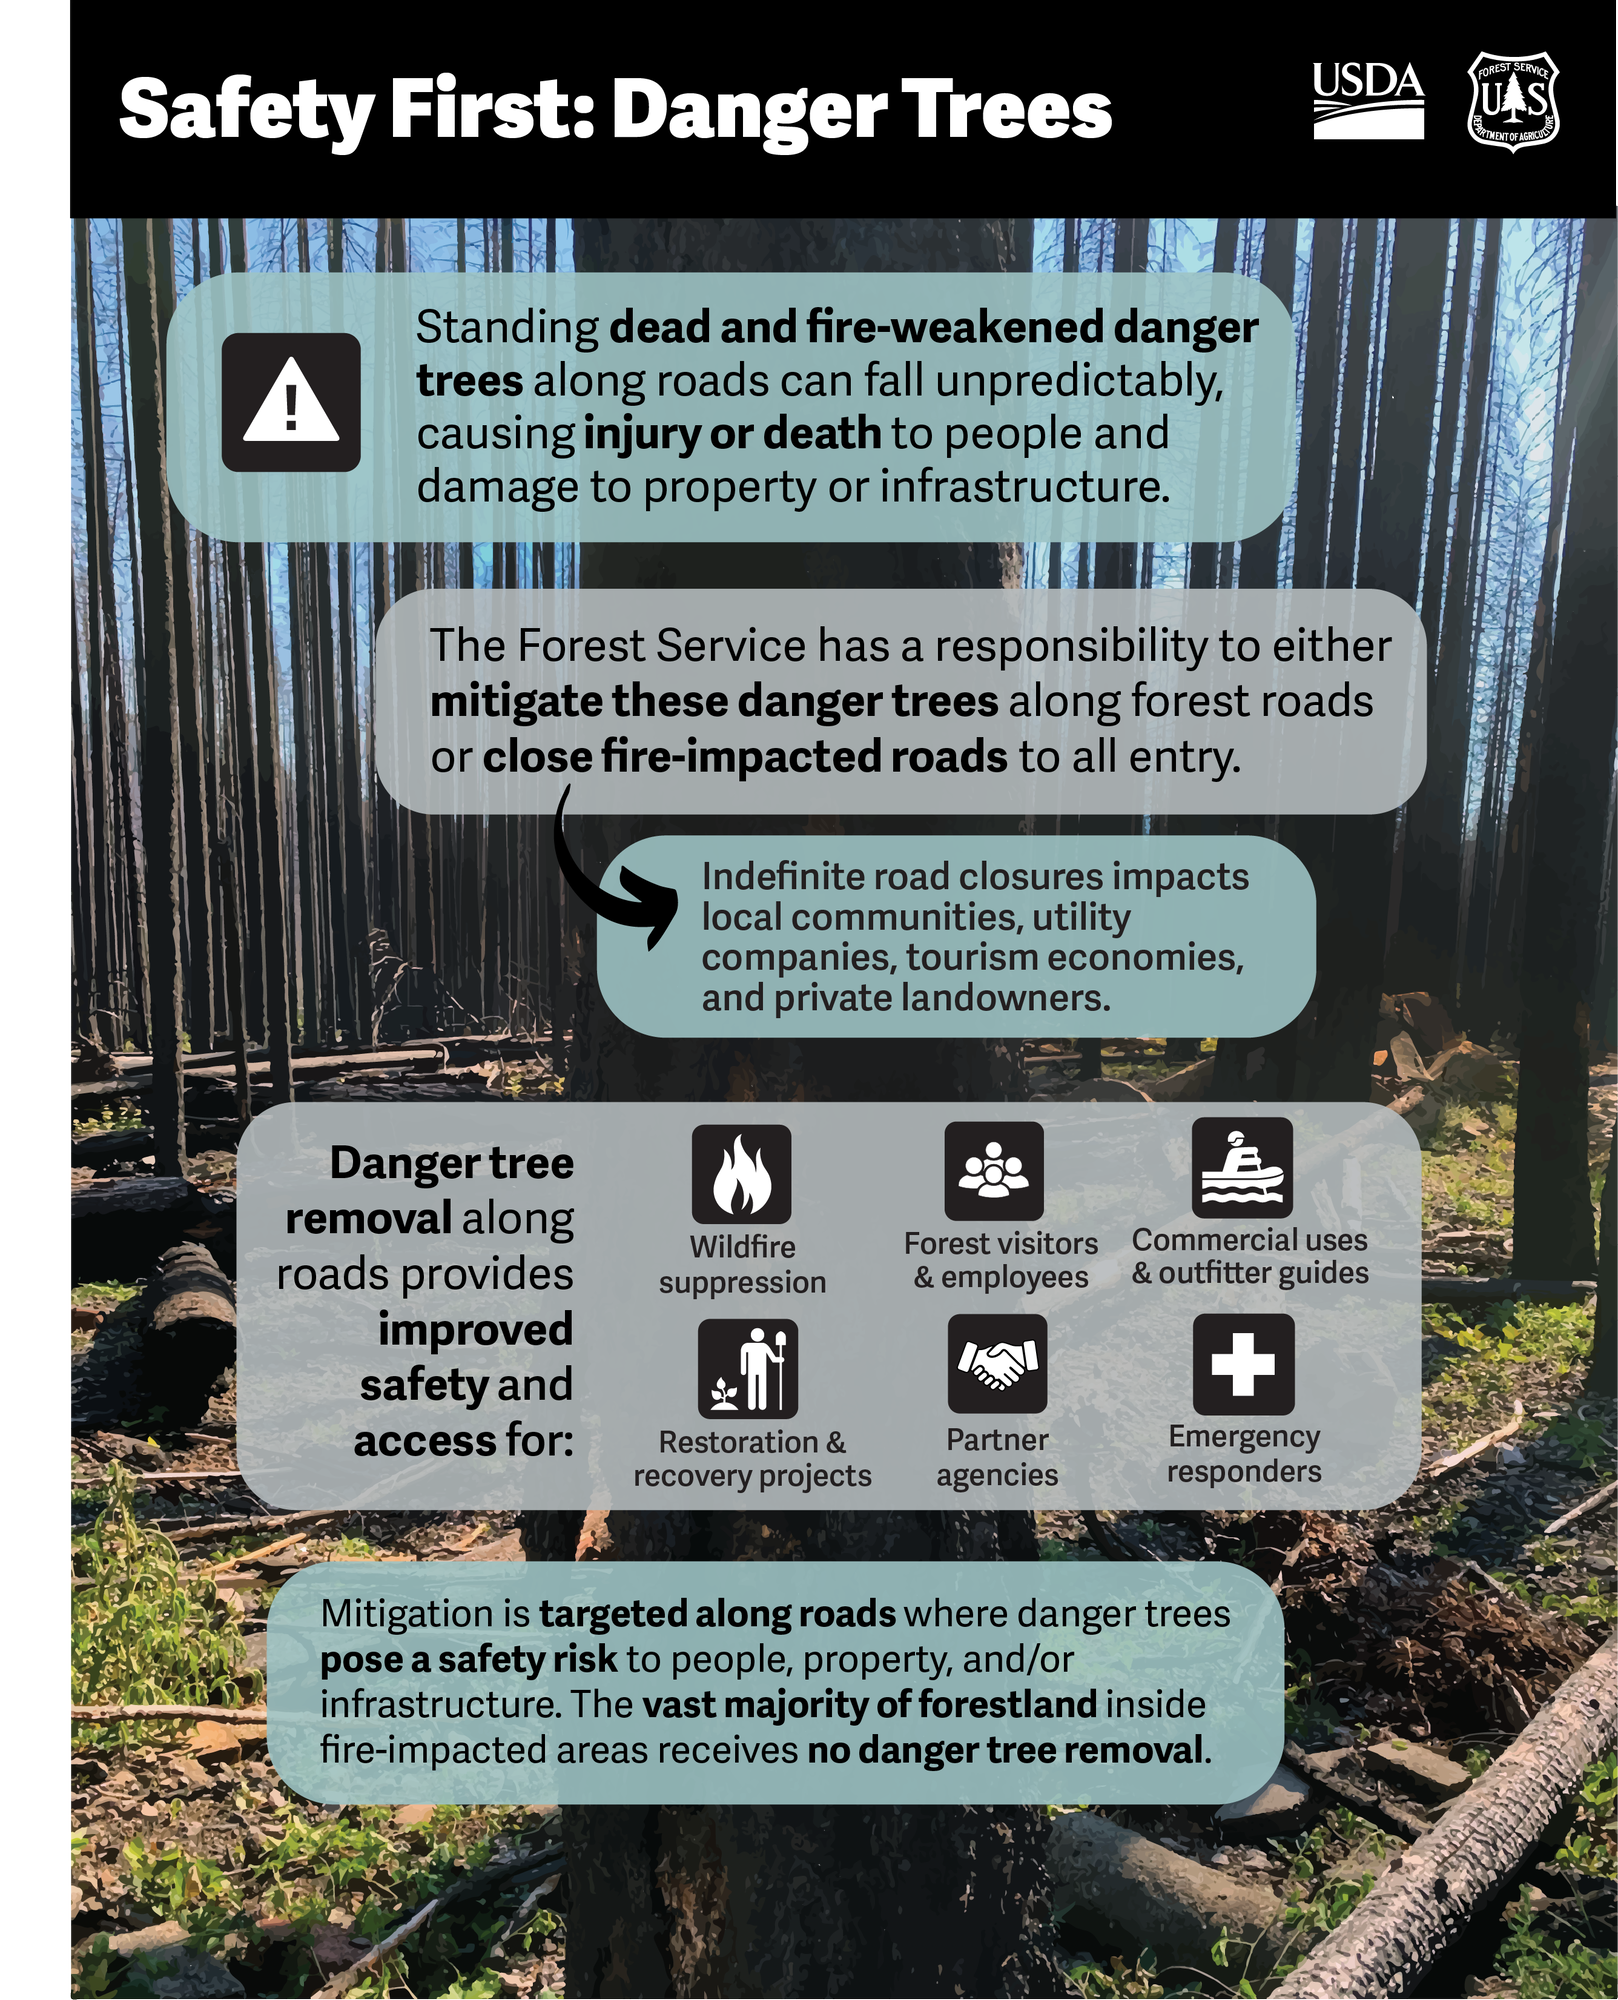 A document that lists safety concerns of danger trees